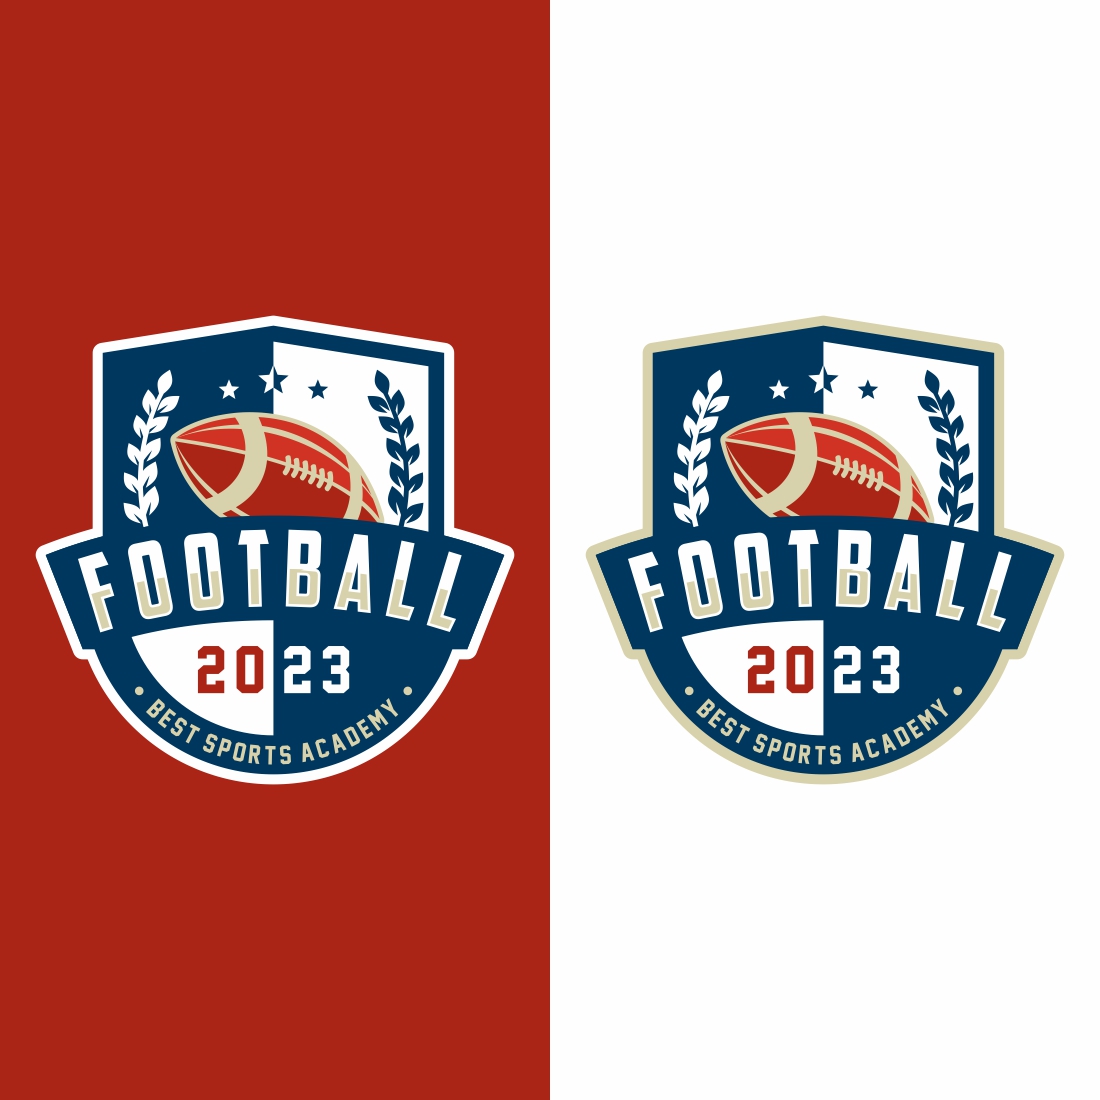 American Football Sports Logo And Badge – Only $7 cover image.